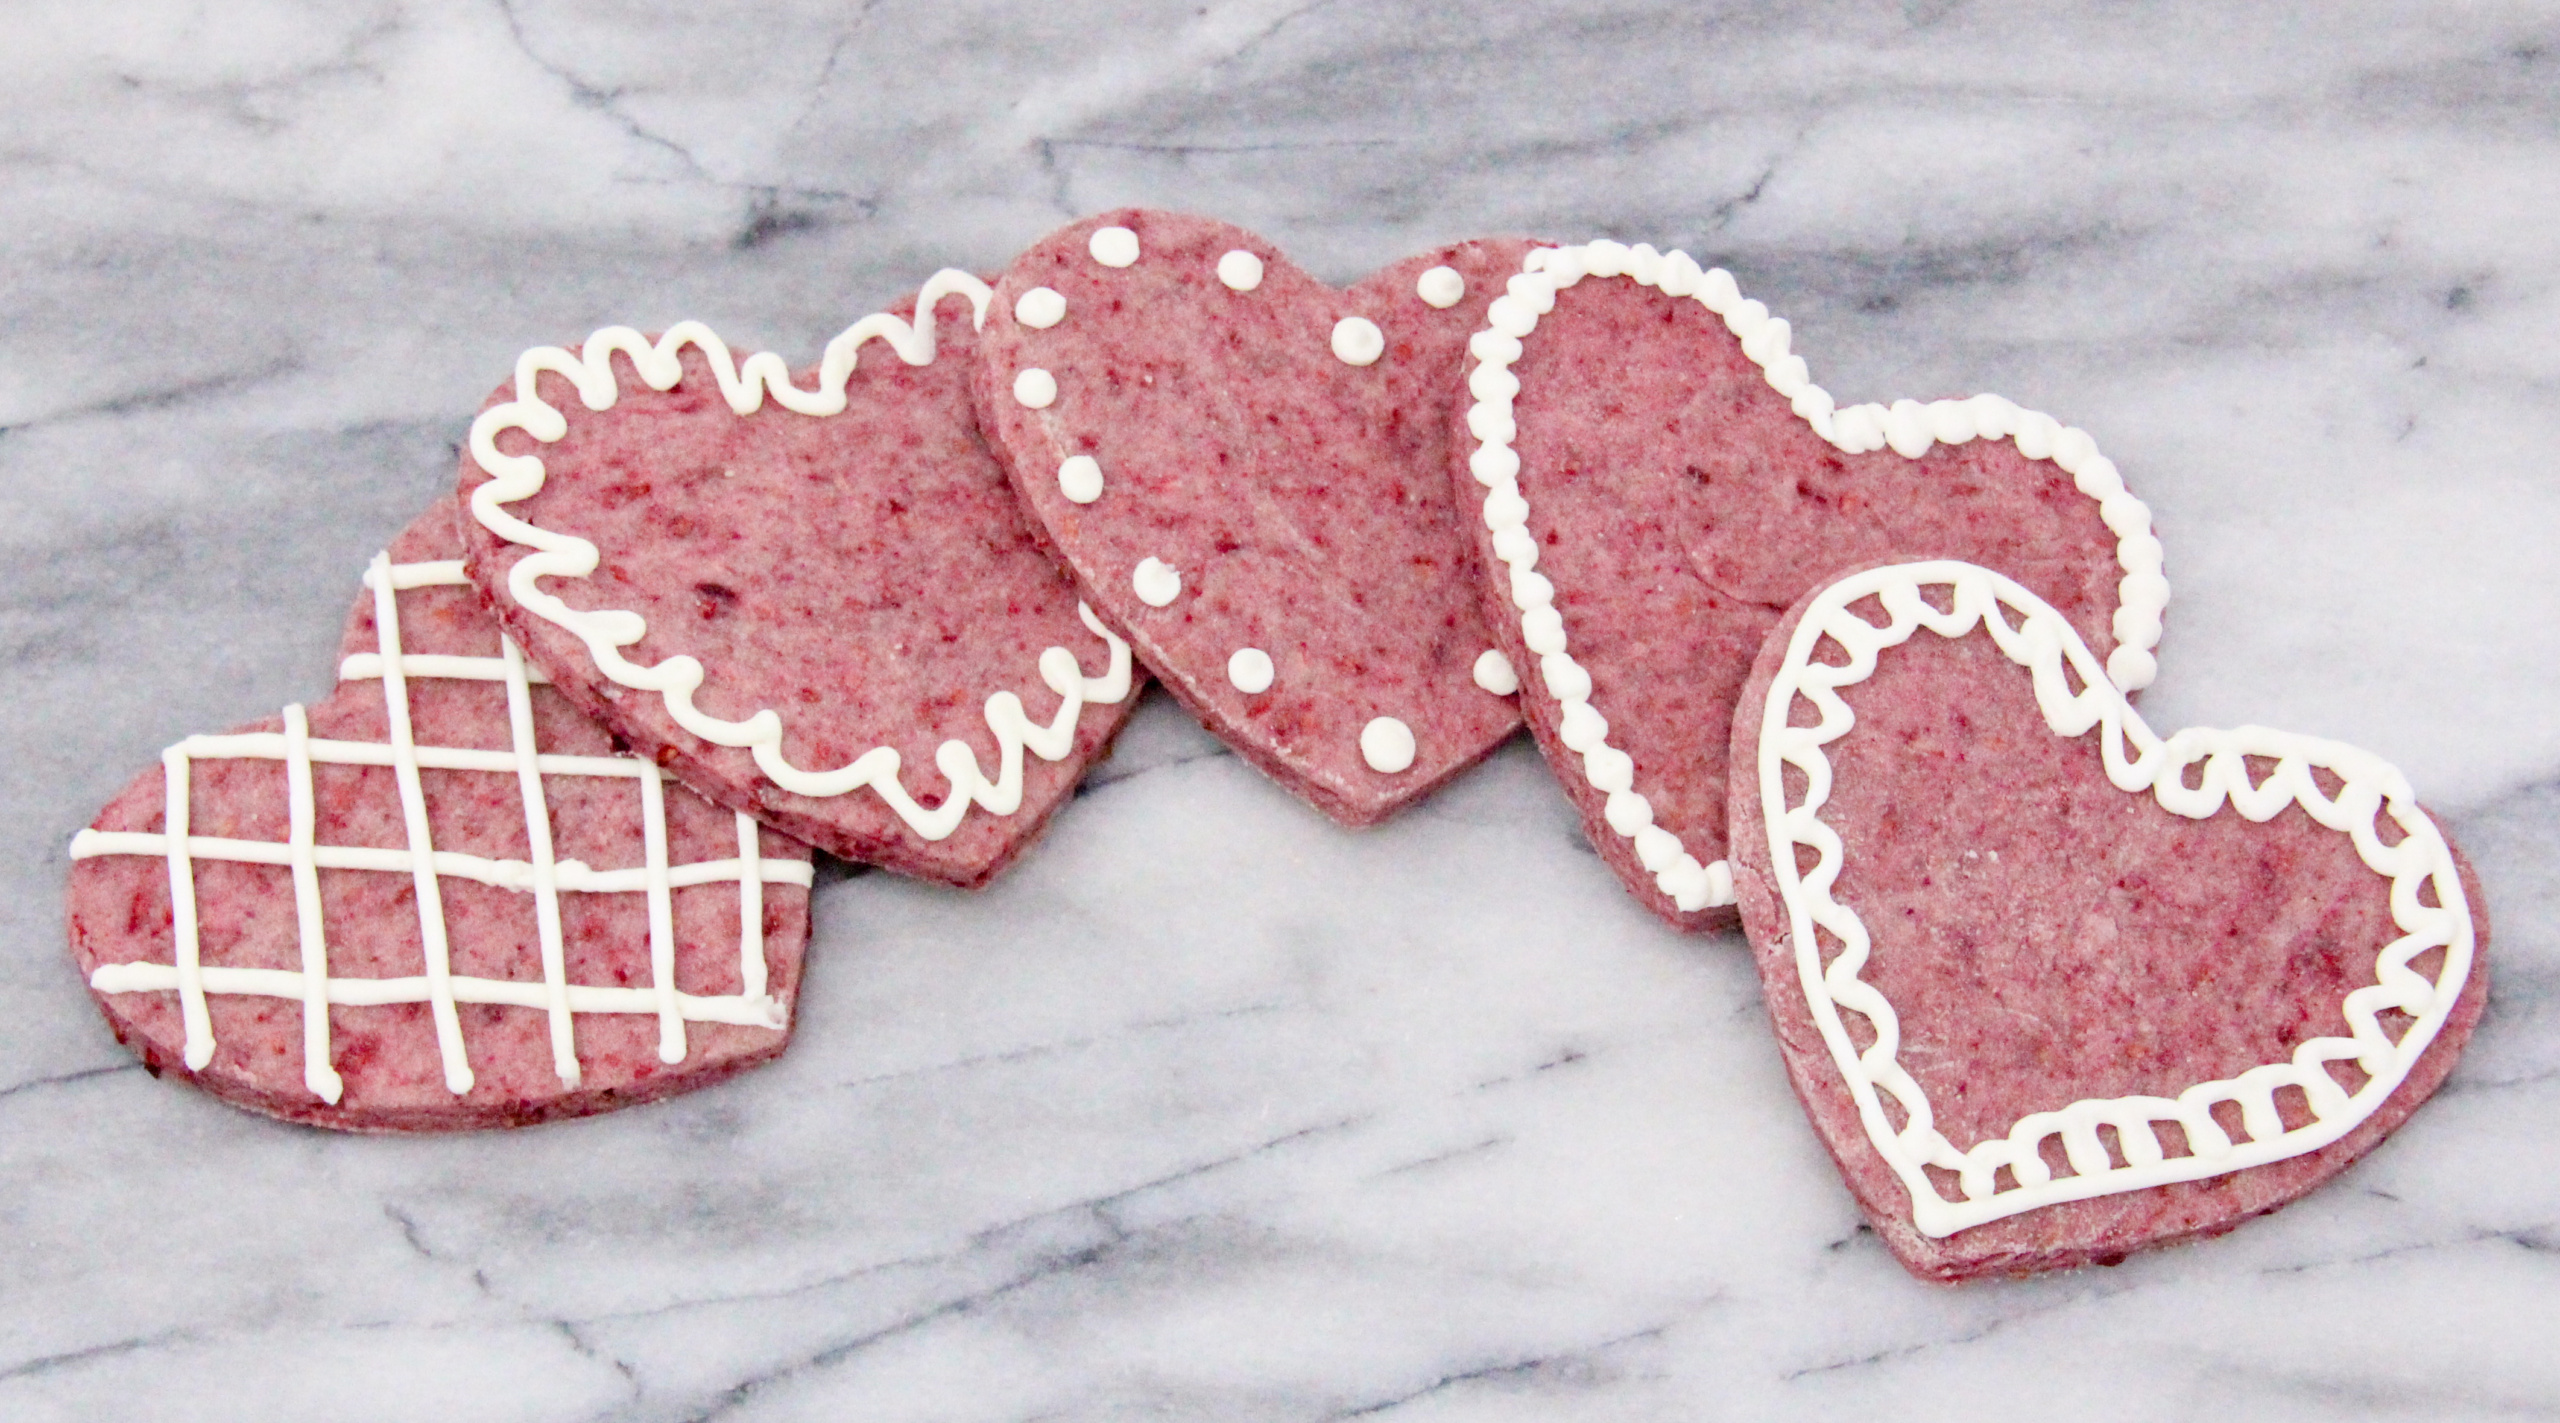 Raspberry Sugar Cookies rely on freeze-dried raspberries to provide a tart sweetness along with a pretty pink color to the cookies, without relying on food coloring. Recipe created by Cinnamon & Sugar for Catherine Bruns, author of CRIMES AND CONFECTIONS.